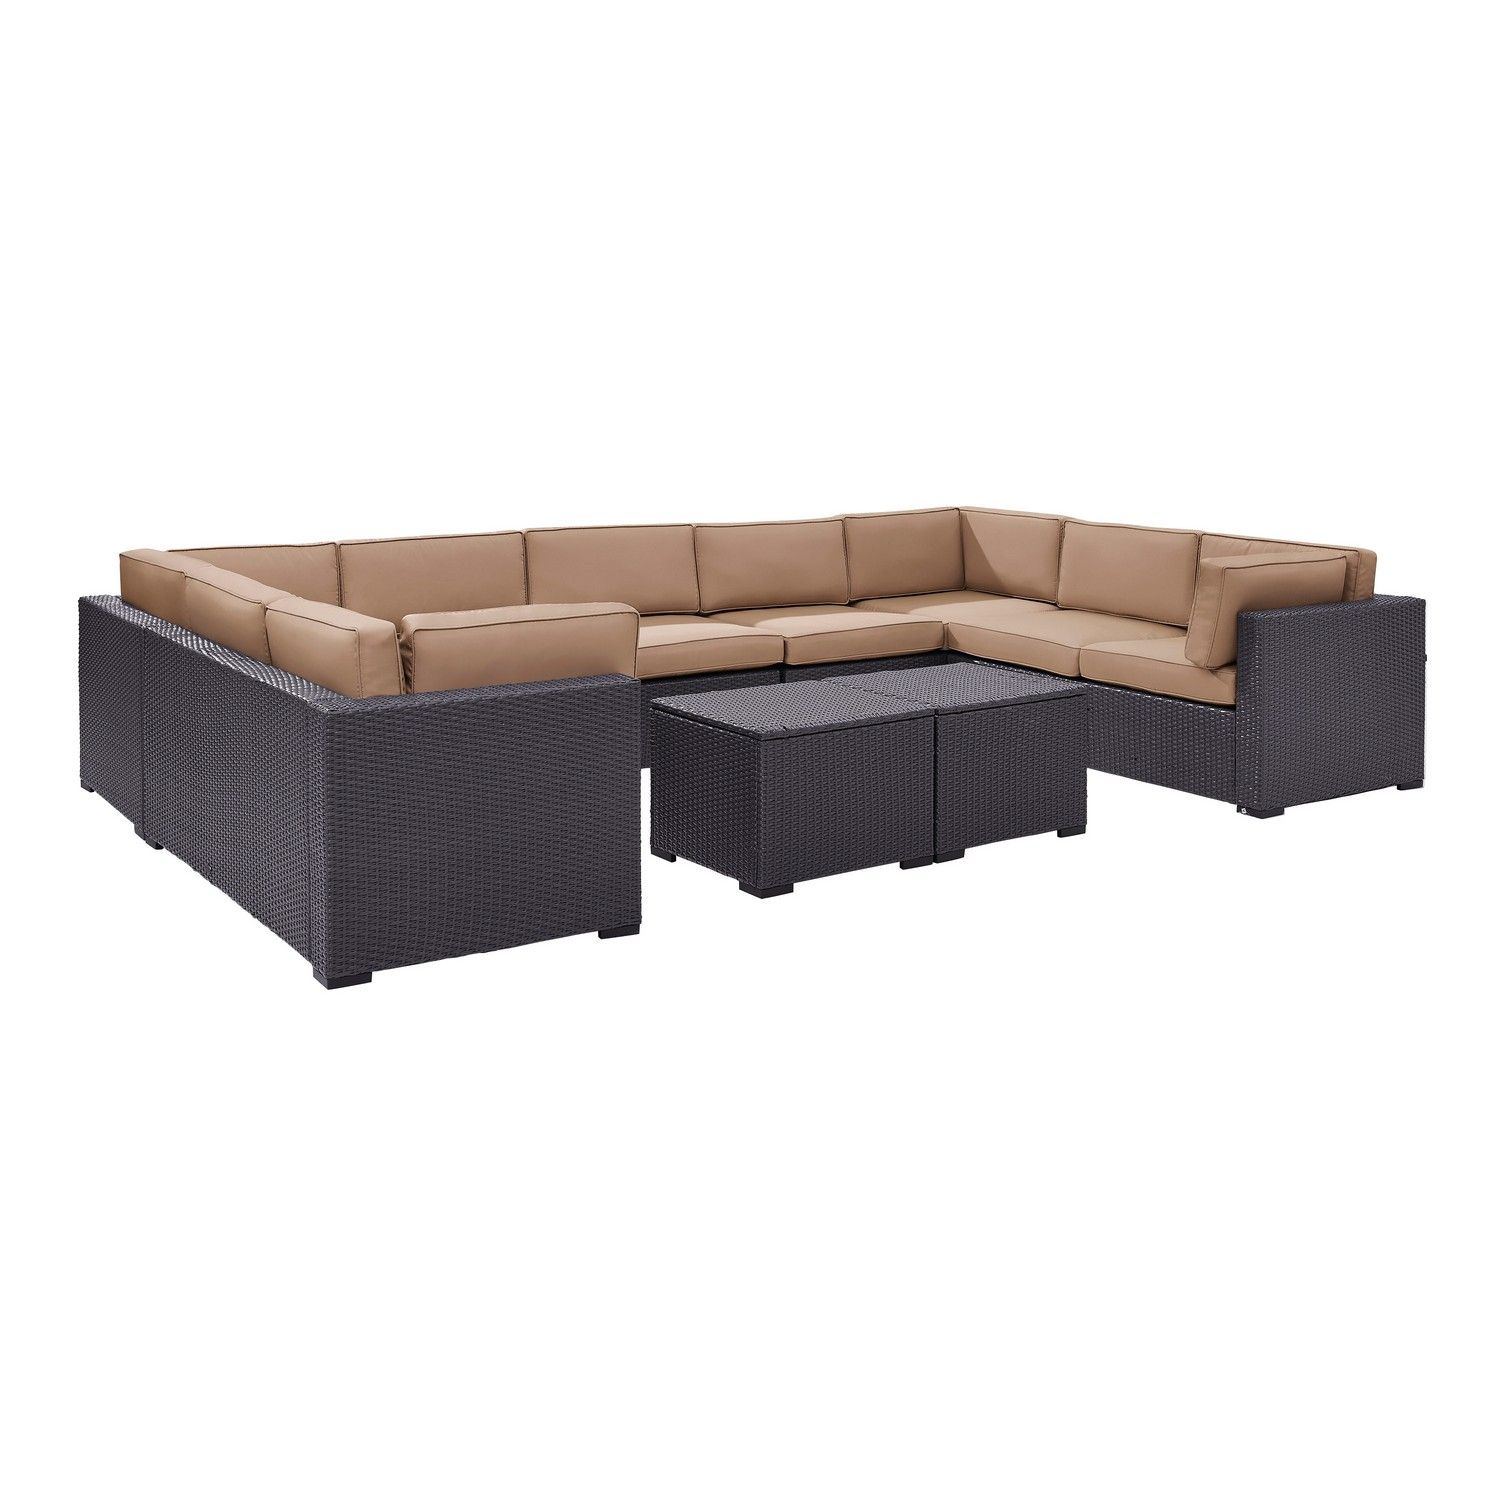 Crosley Biscayne 7-PC Outdoor Wicker Sectional Set - 4 Loveseats, Armless Chair, 2 Coffee Tables - Mocha/Brown